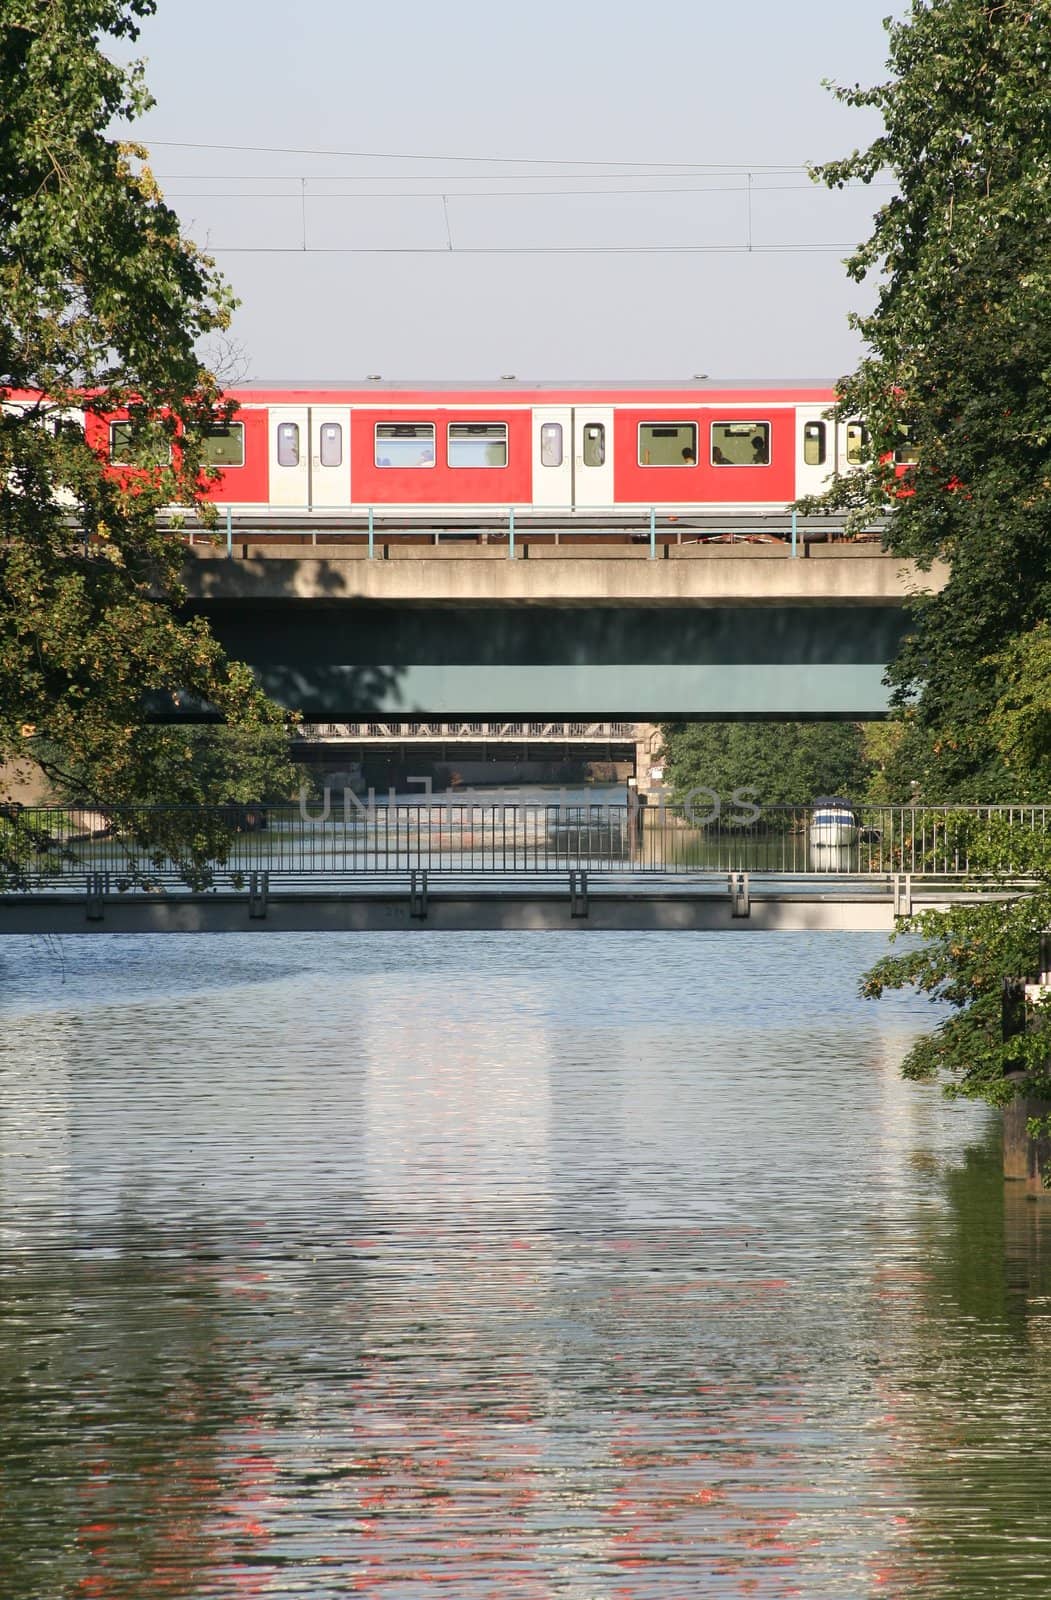 Commuter train on a bridge over a canal near the city center of Hamburg, Germany. Also: a narrow pedestrians' bridge in the foreground. Hamburg has 2500 bridges ;-)